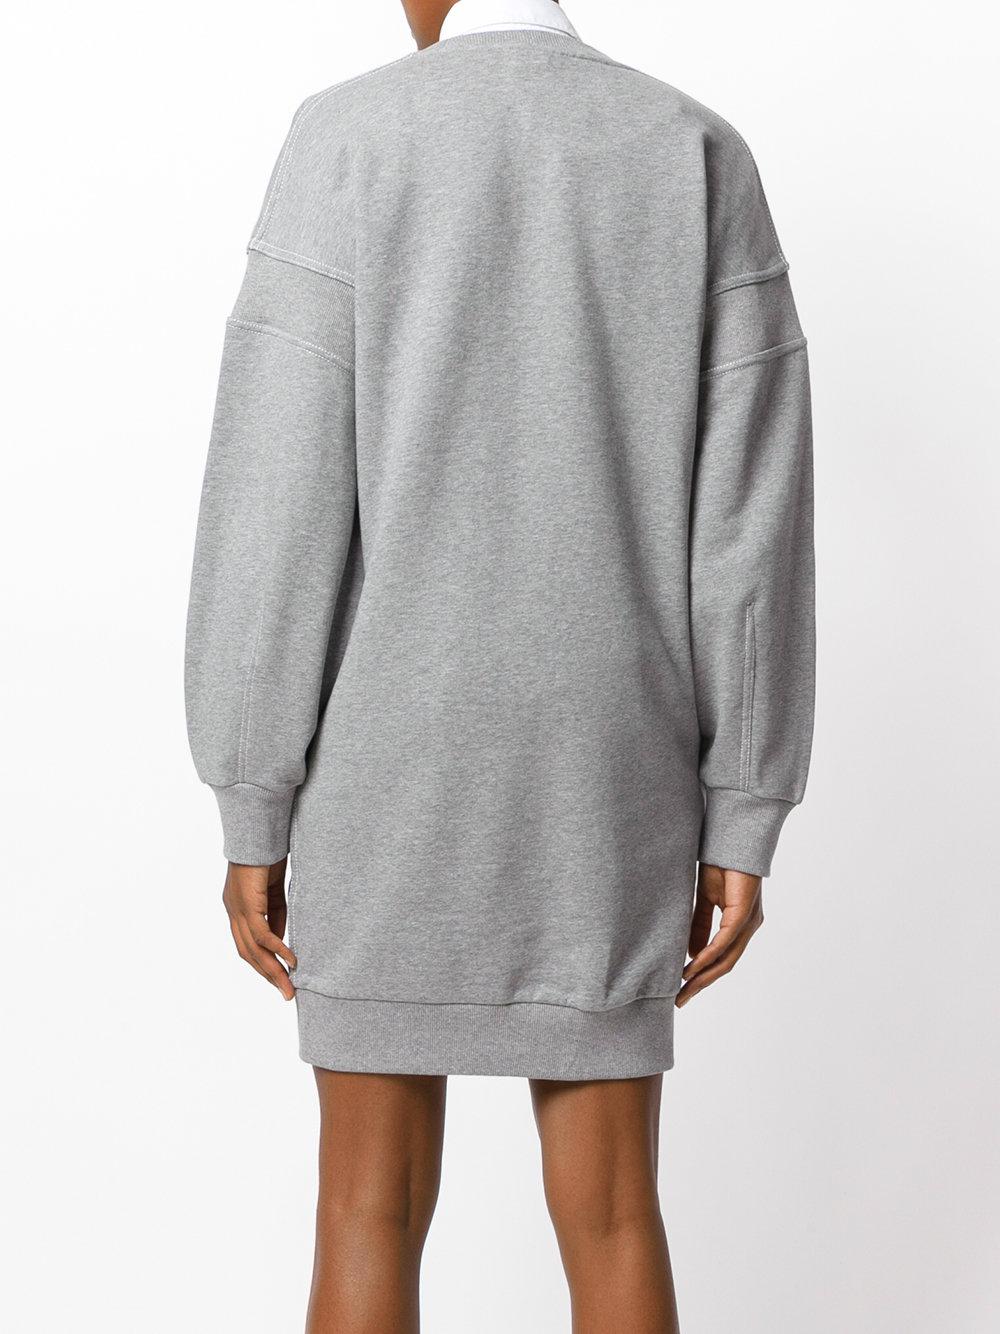 Burberry Embroidered Motif Cotton Jersey Sweatshirt Dress in Grey (Gray) |  Lyst